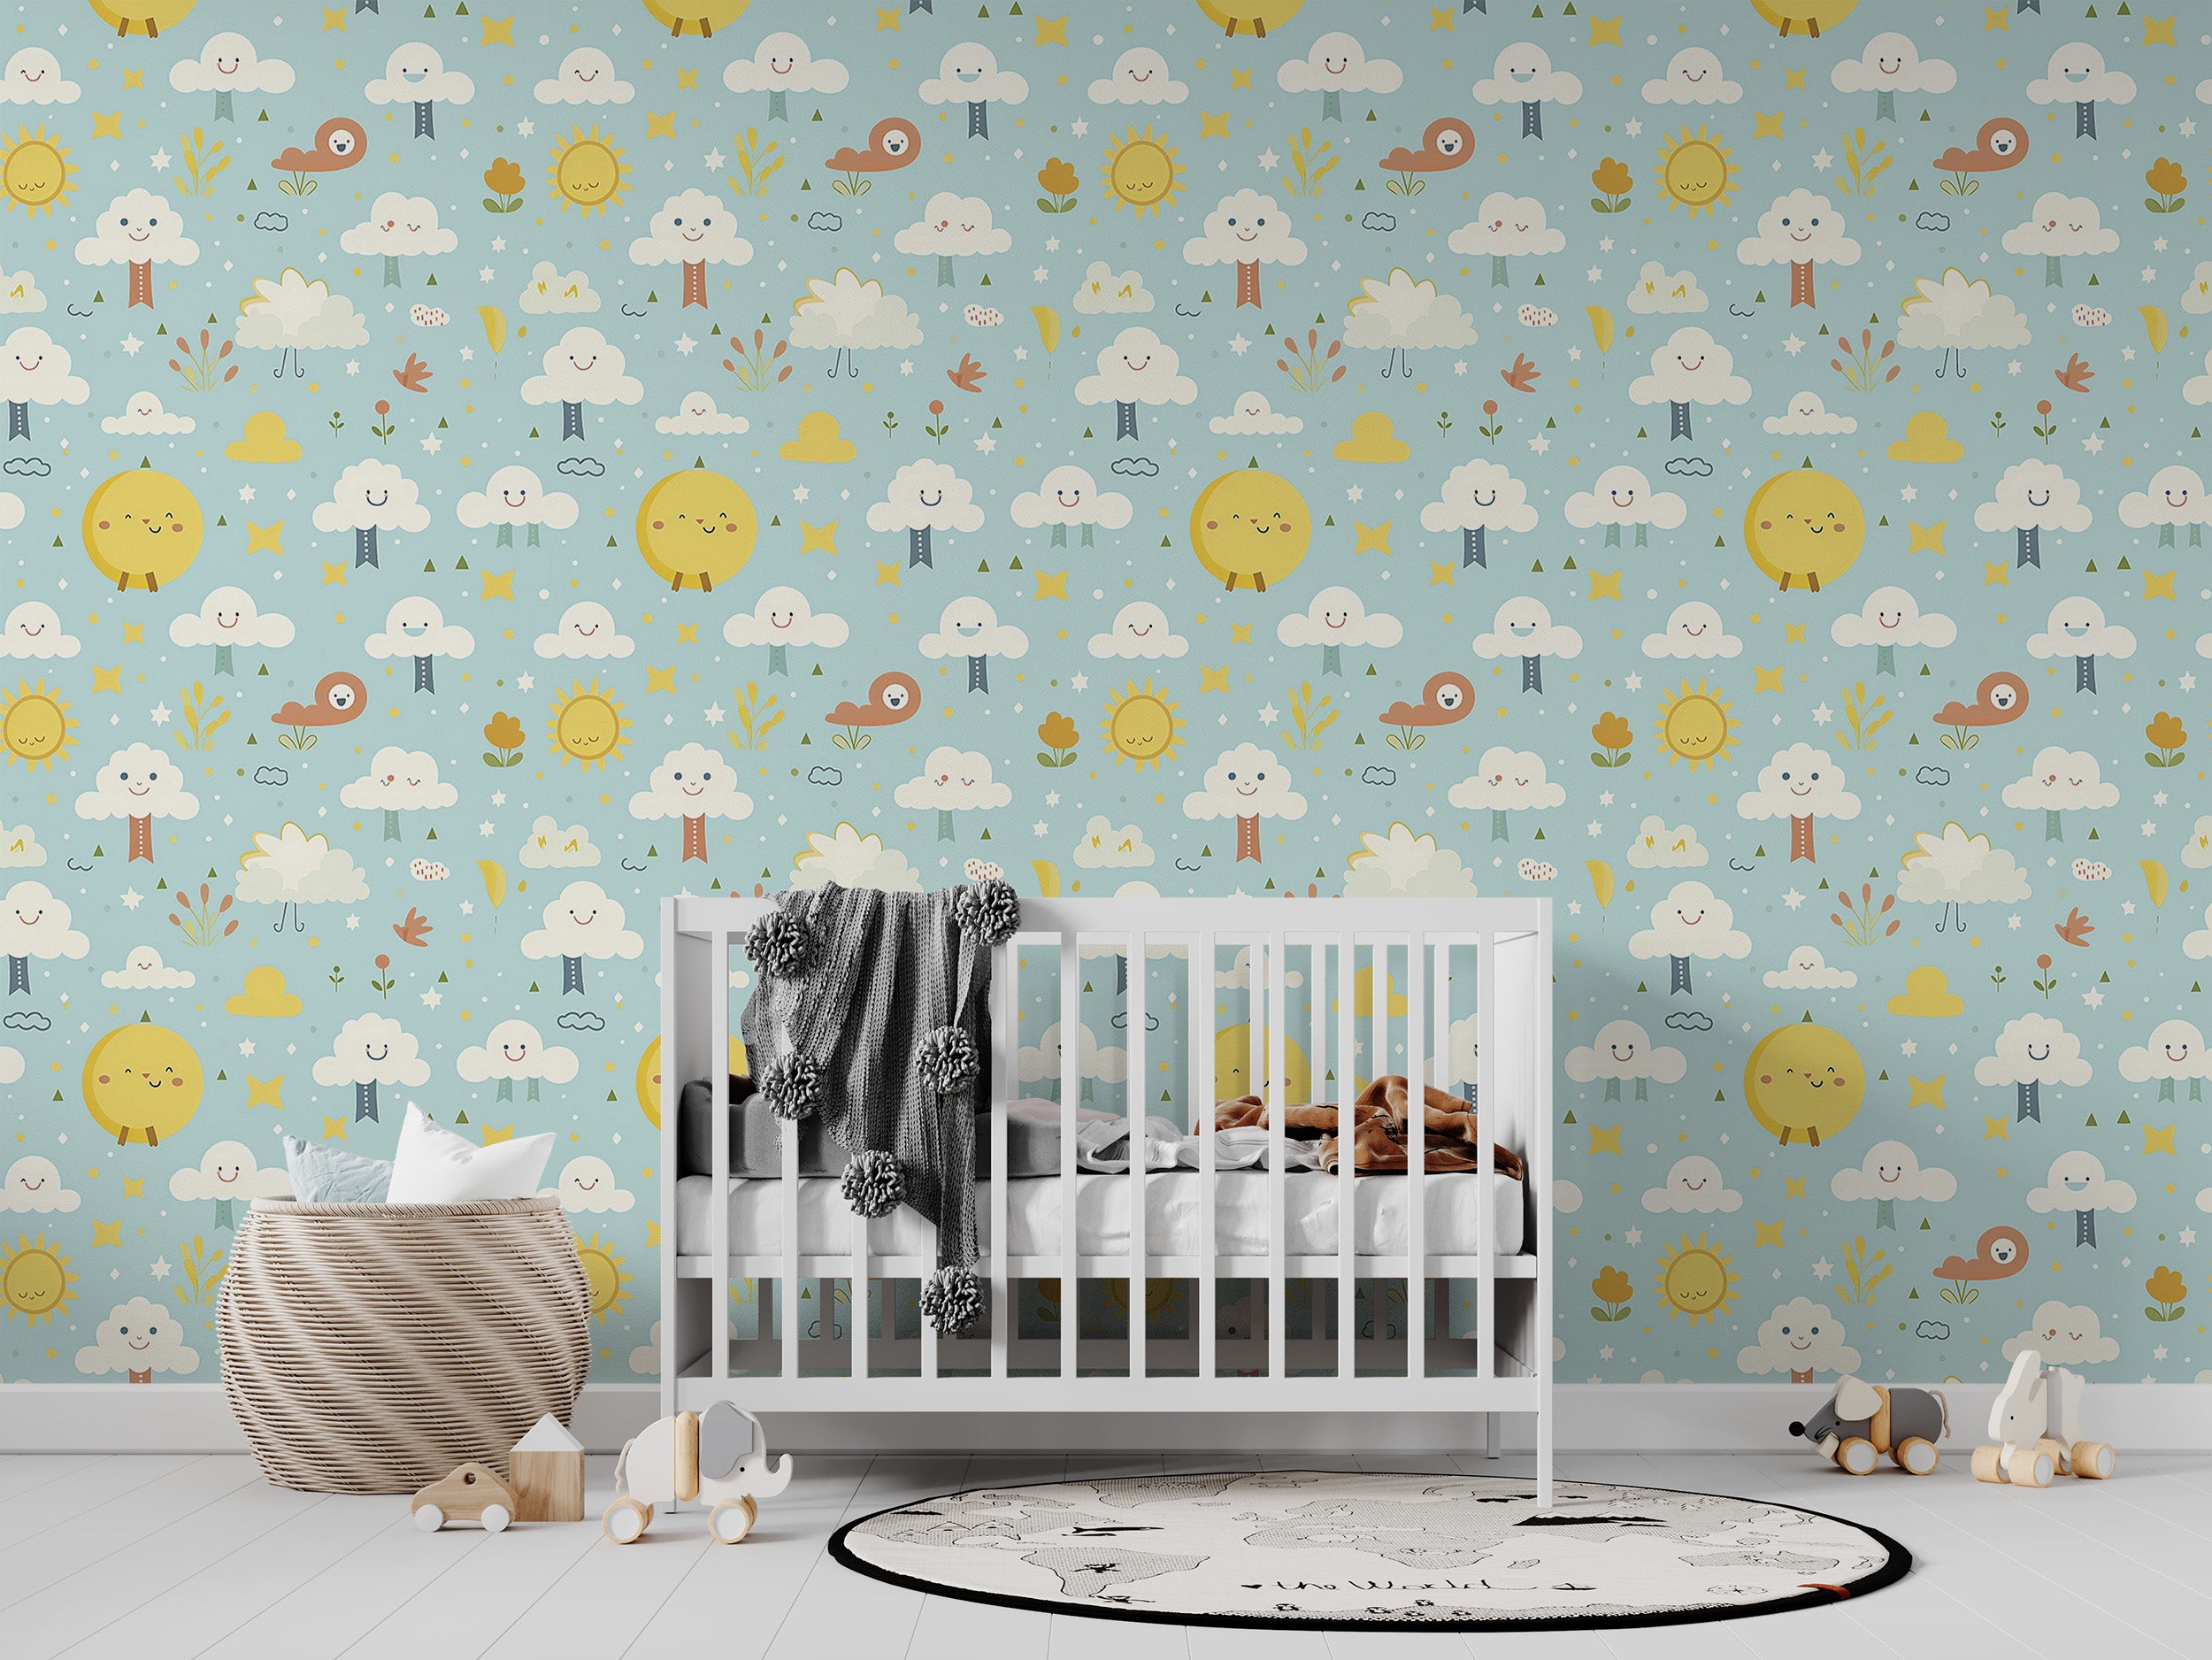 Easy-to-Apply and Removable Blue Wallpaper for Children